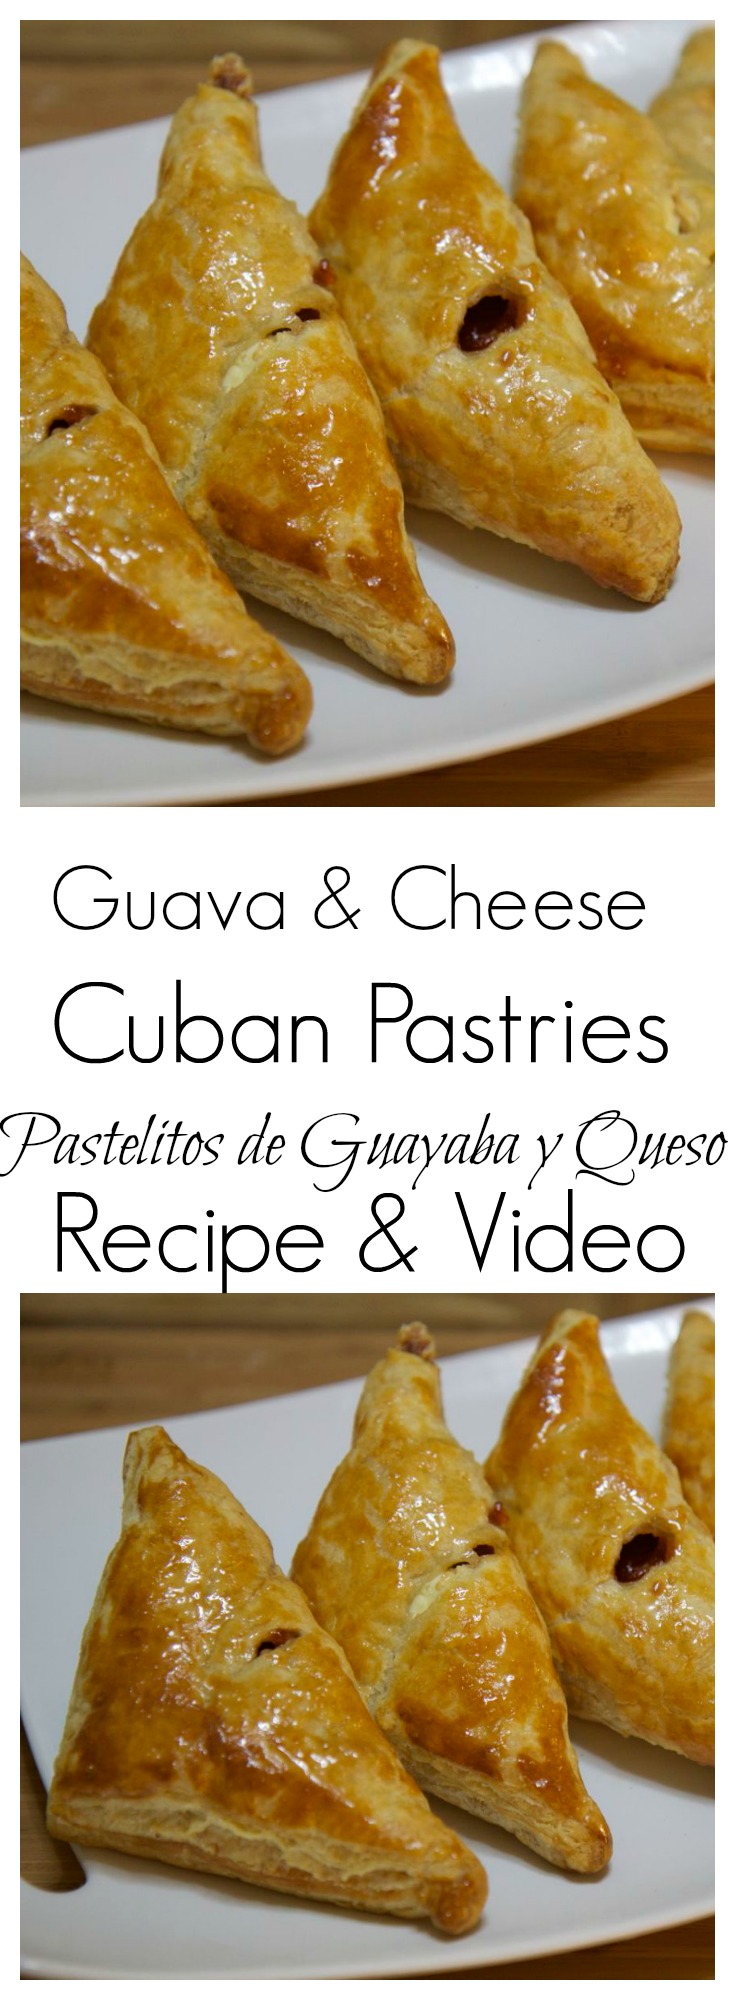 Learn how to make these guava and cheese cuban pastries from Cookedbyjulie.com today!